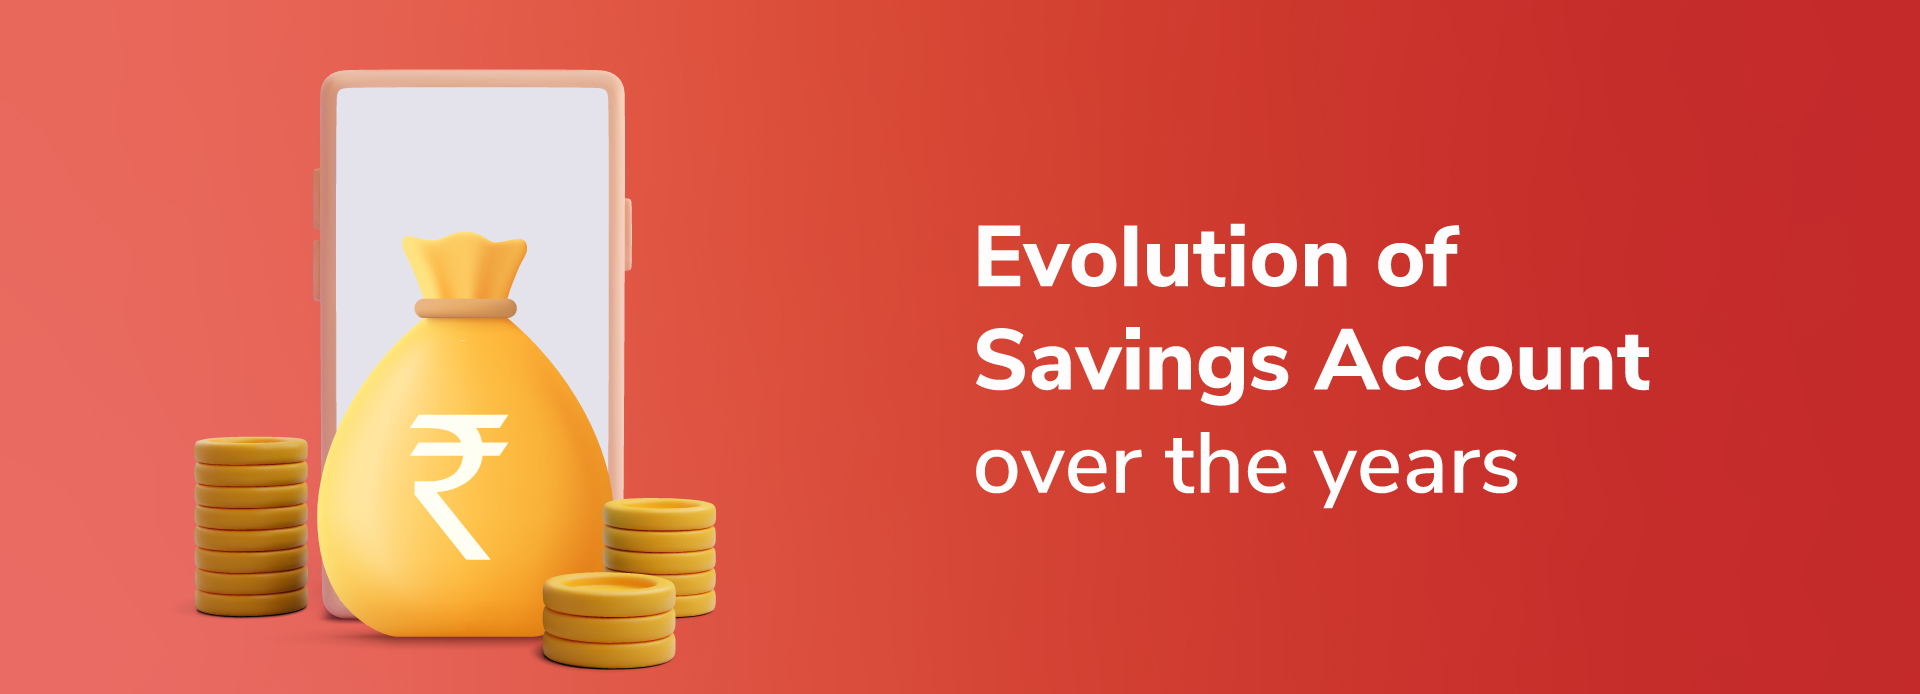 Digital savings account: How savings accounts have evolved over the years